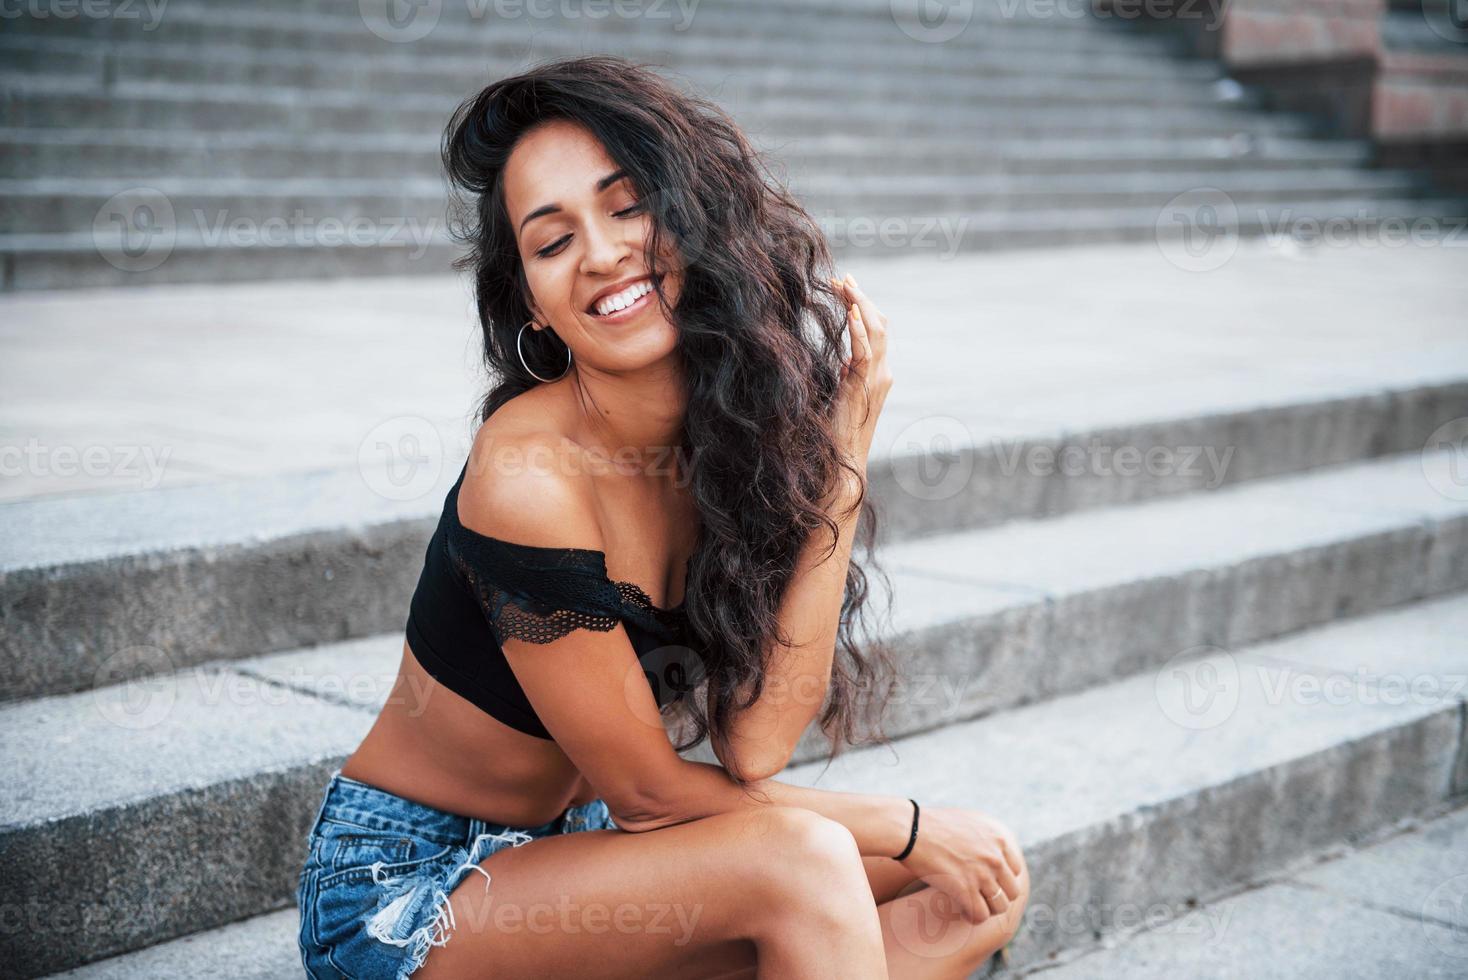 Toothy smile. Beautiful woman with curly black hair have good time in the city at daytime photo